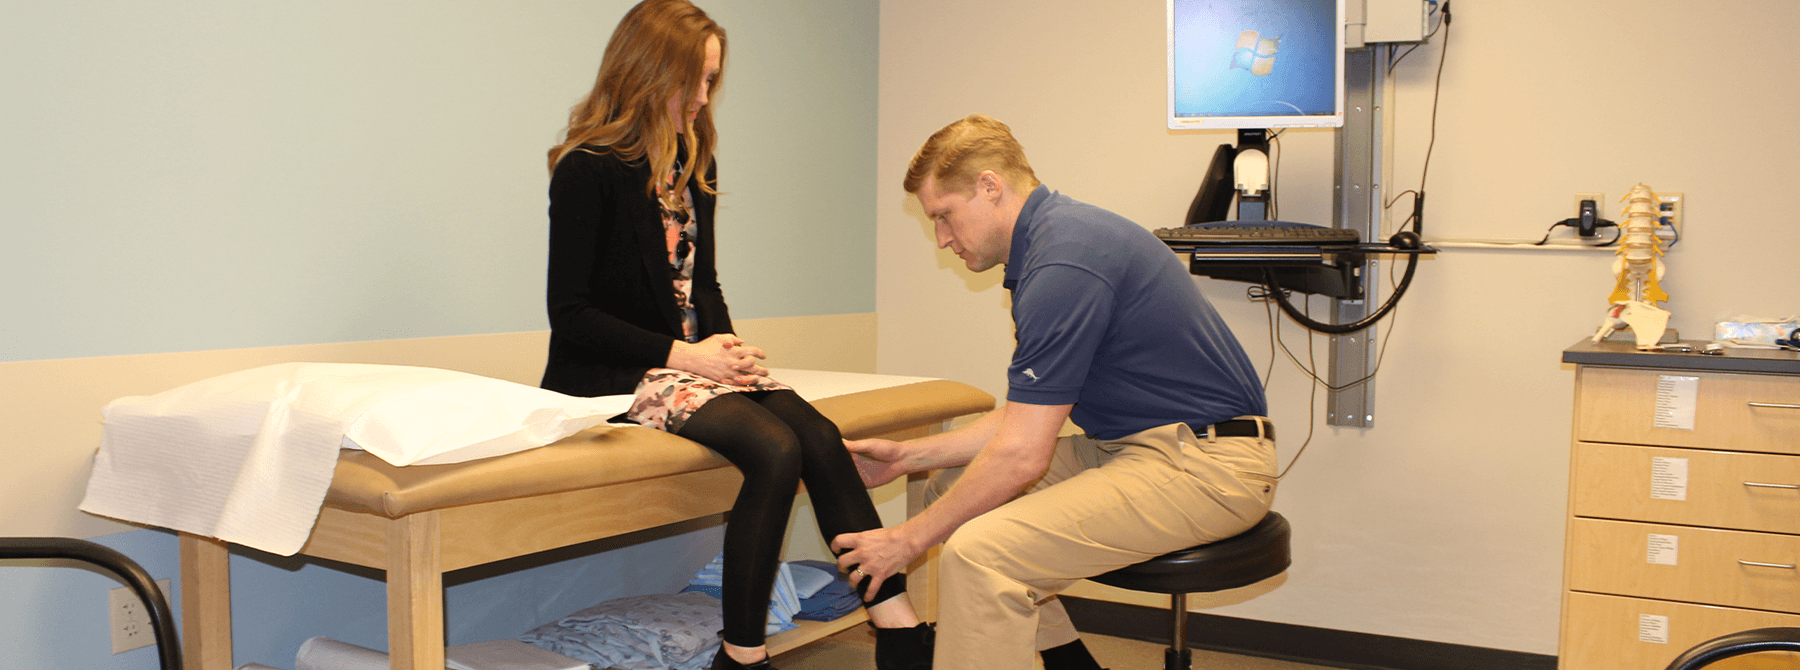 doctor chris bales providing a knee examination to patient